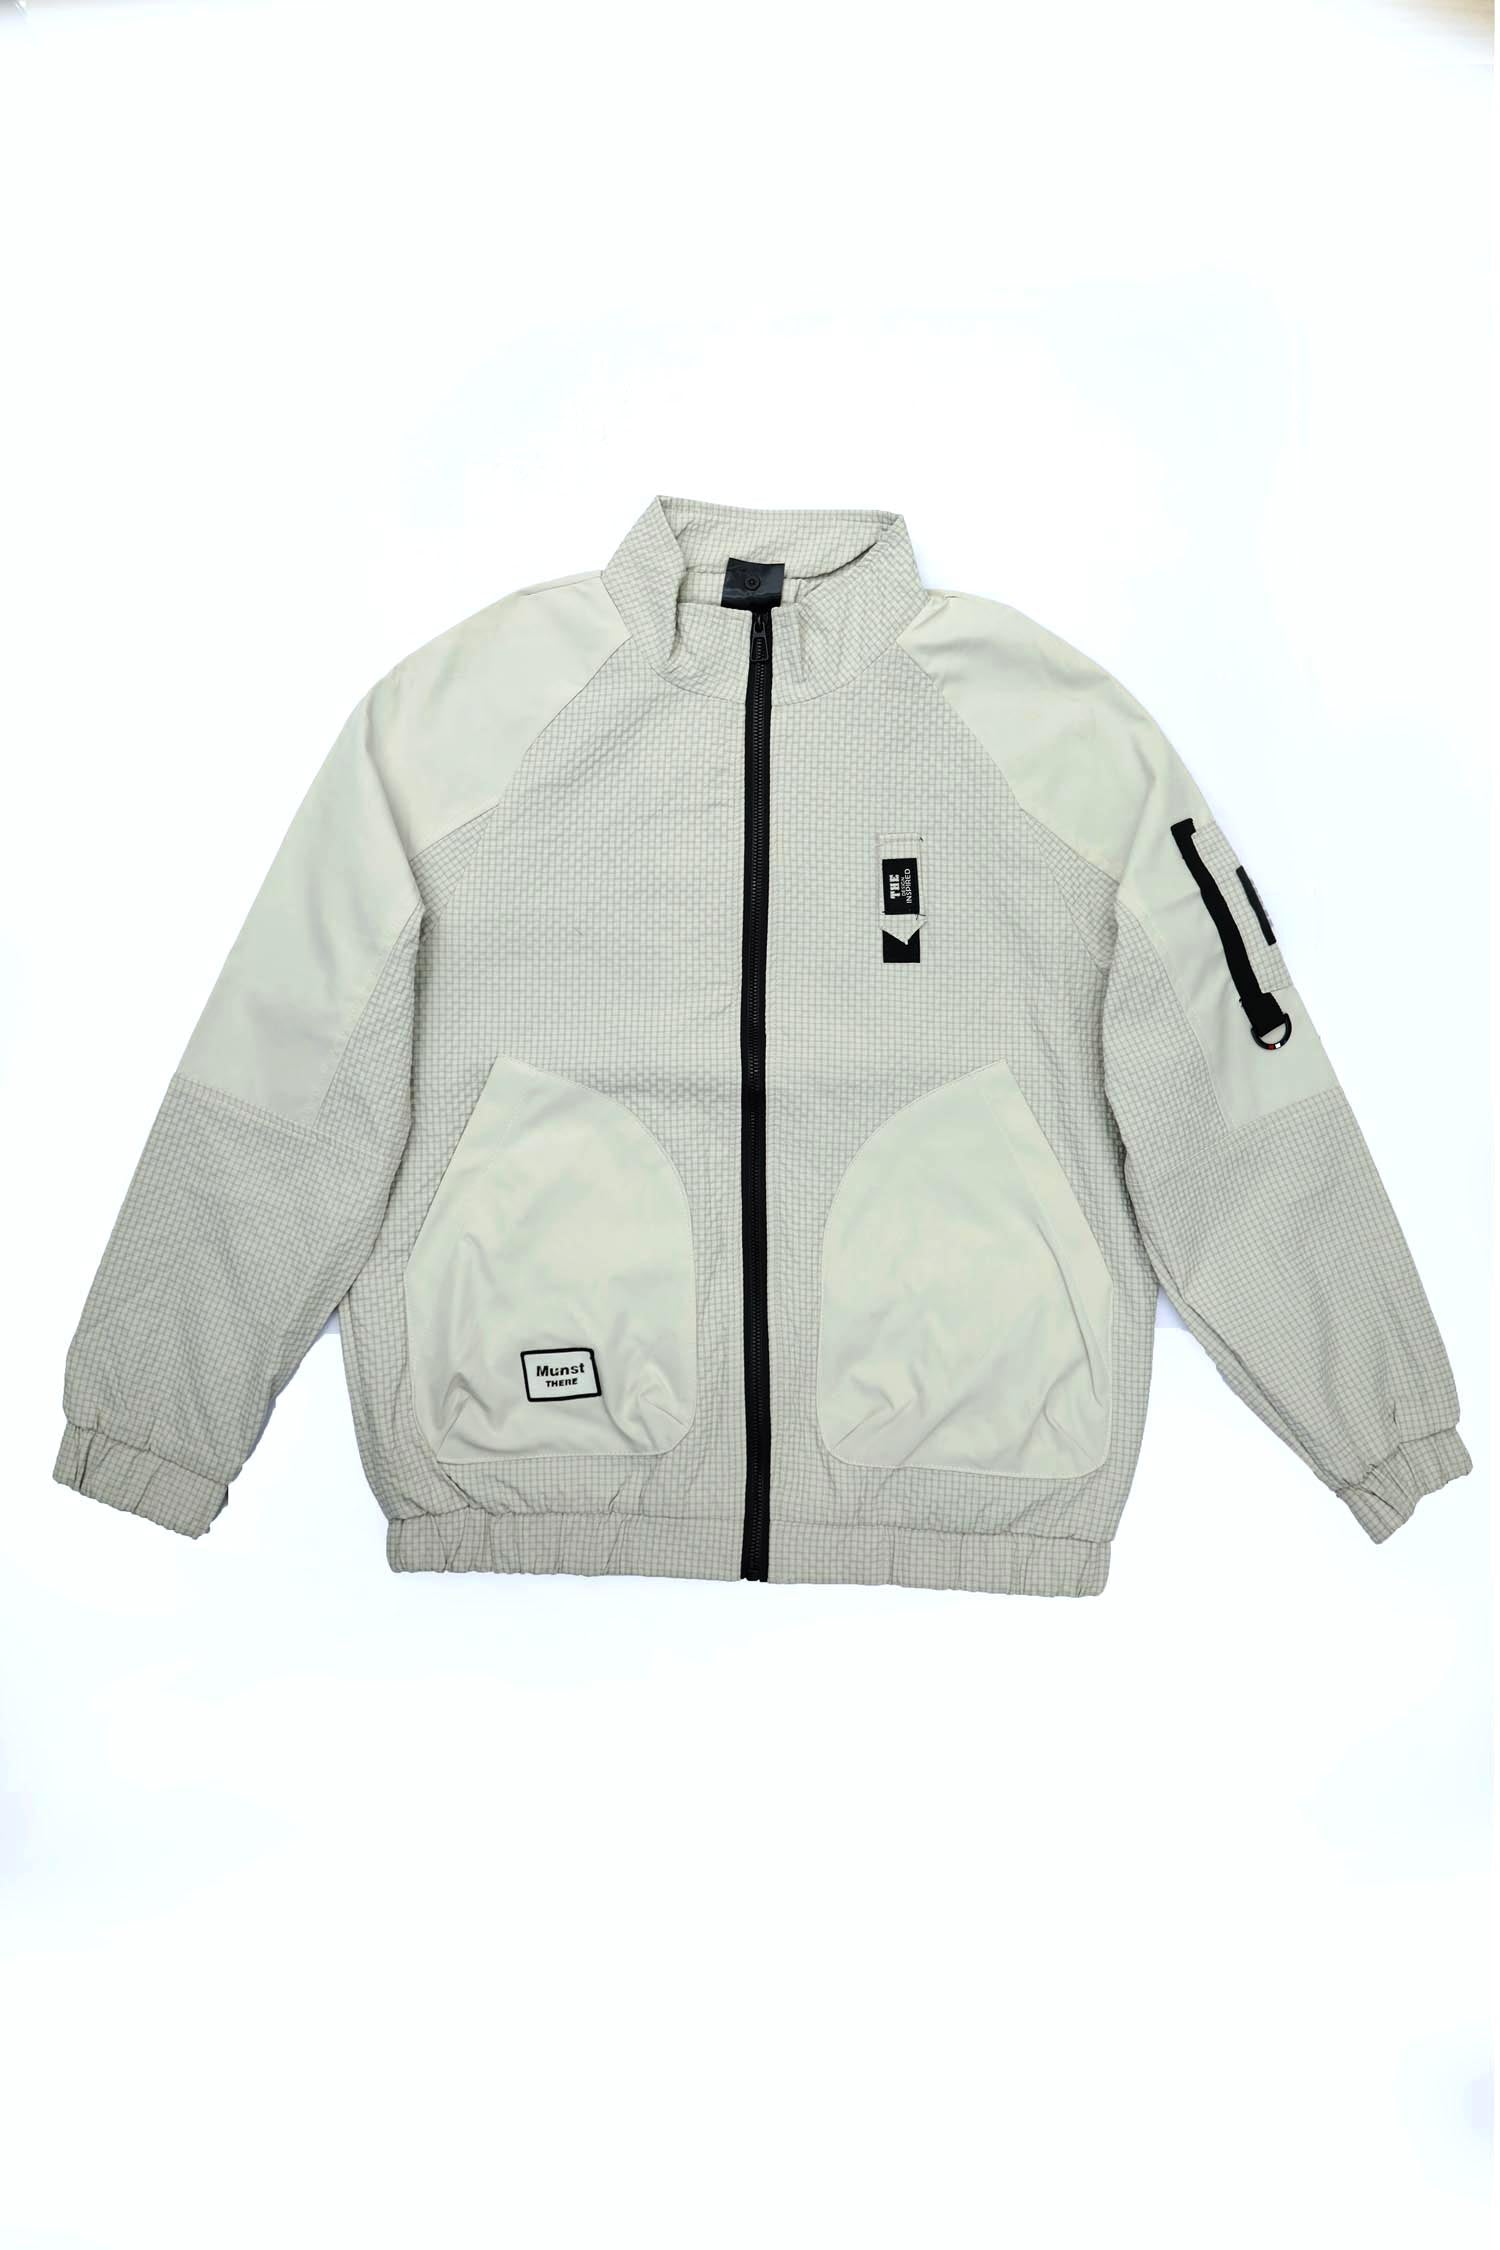 Branded Patch Men's Light Weight Jacket